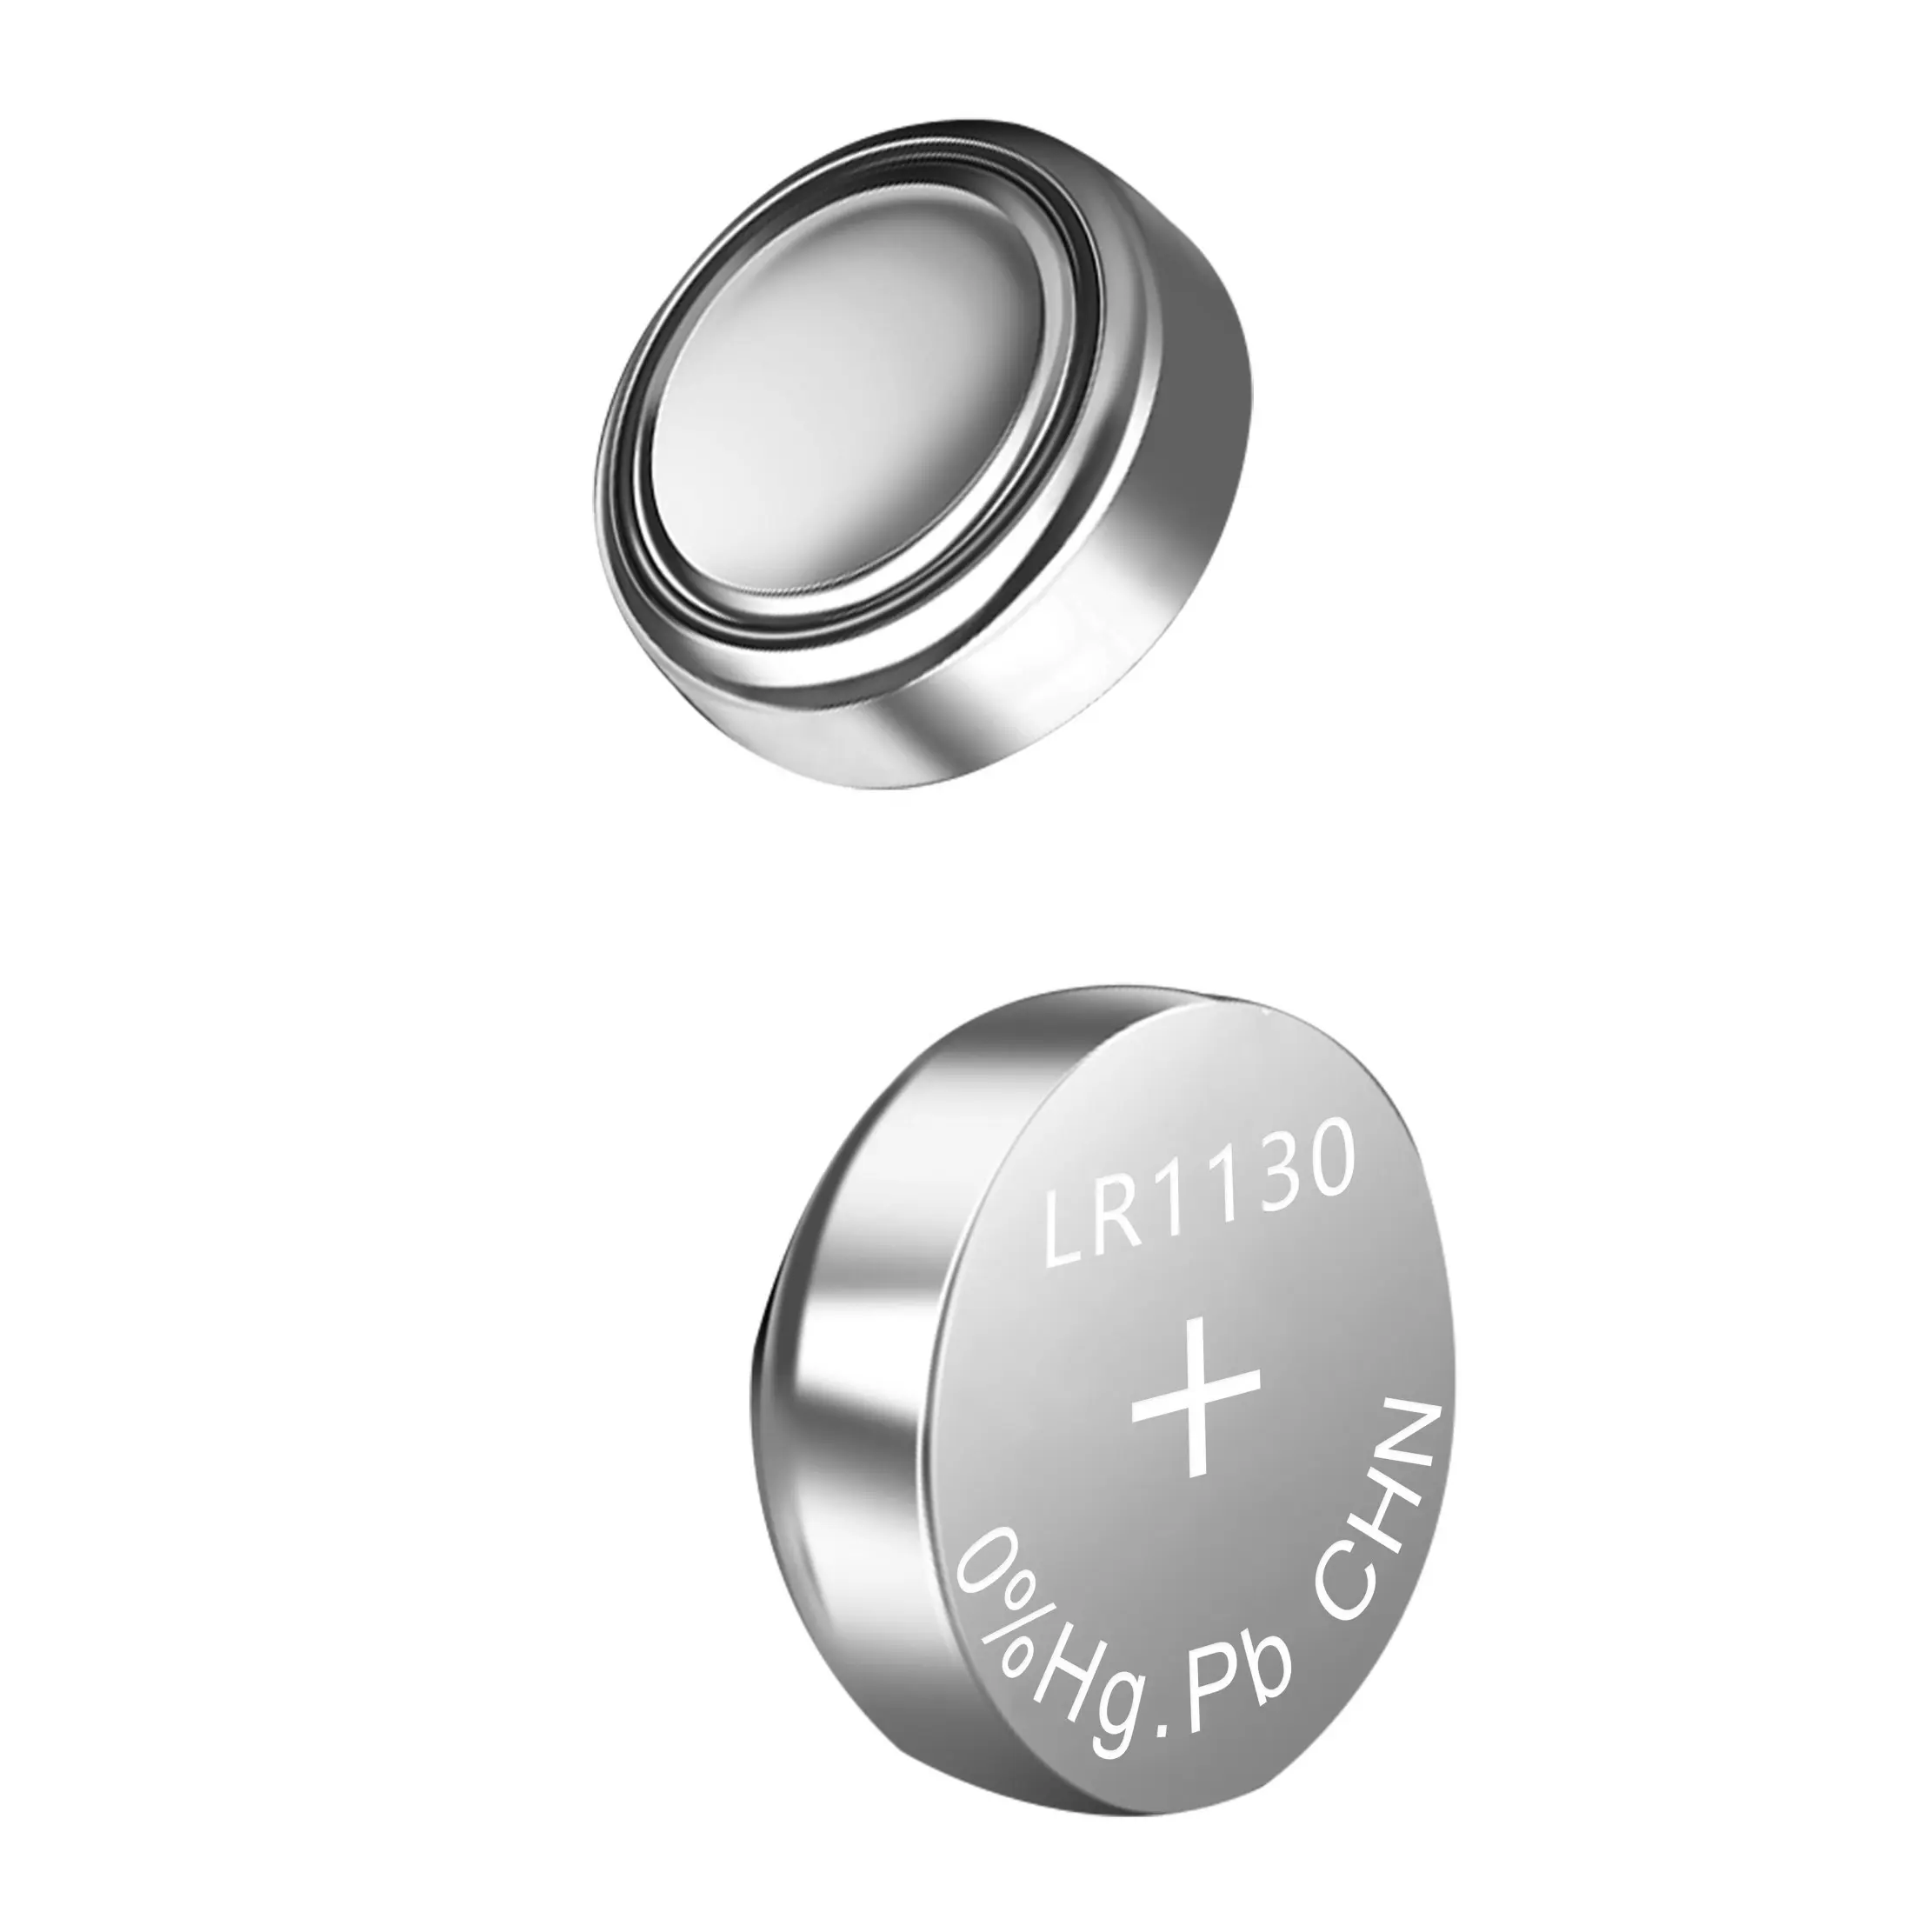 Ag10 coin cell 1.5v lr1130 zinc manganese button cell battery